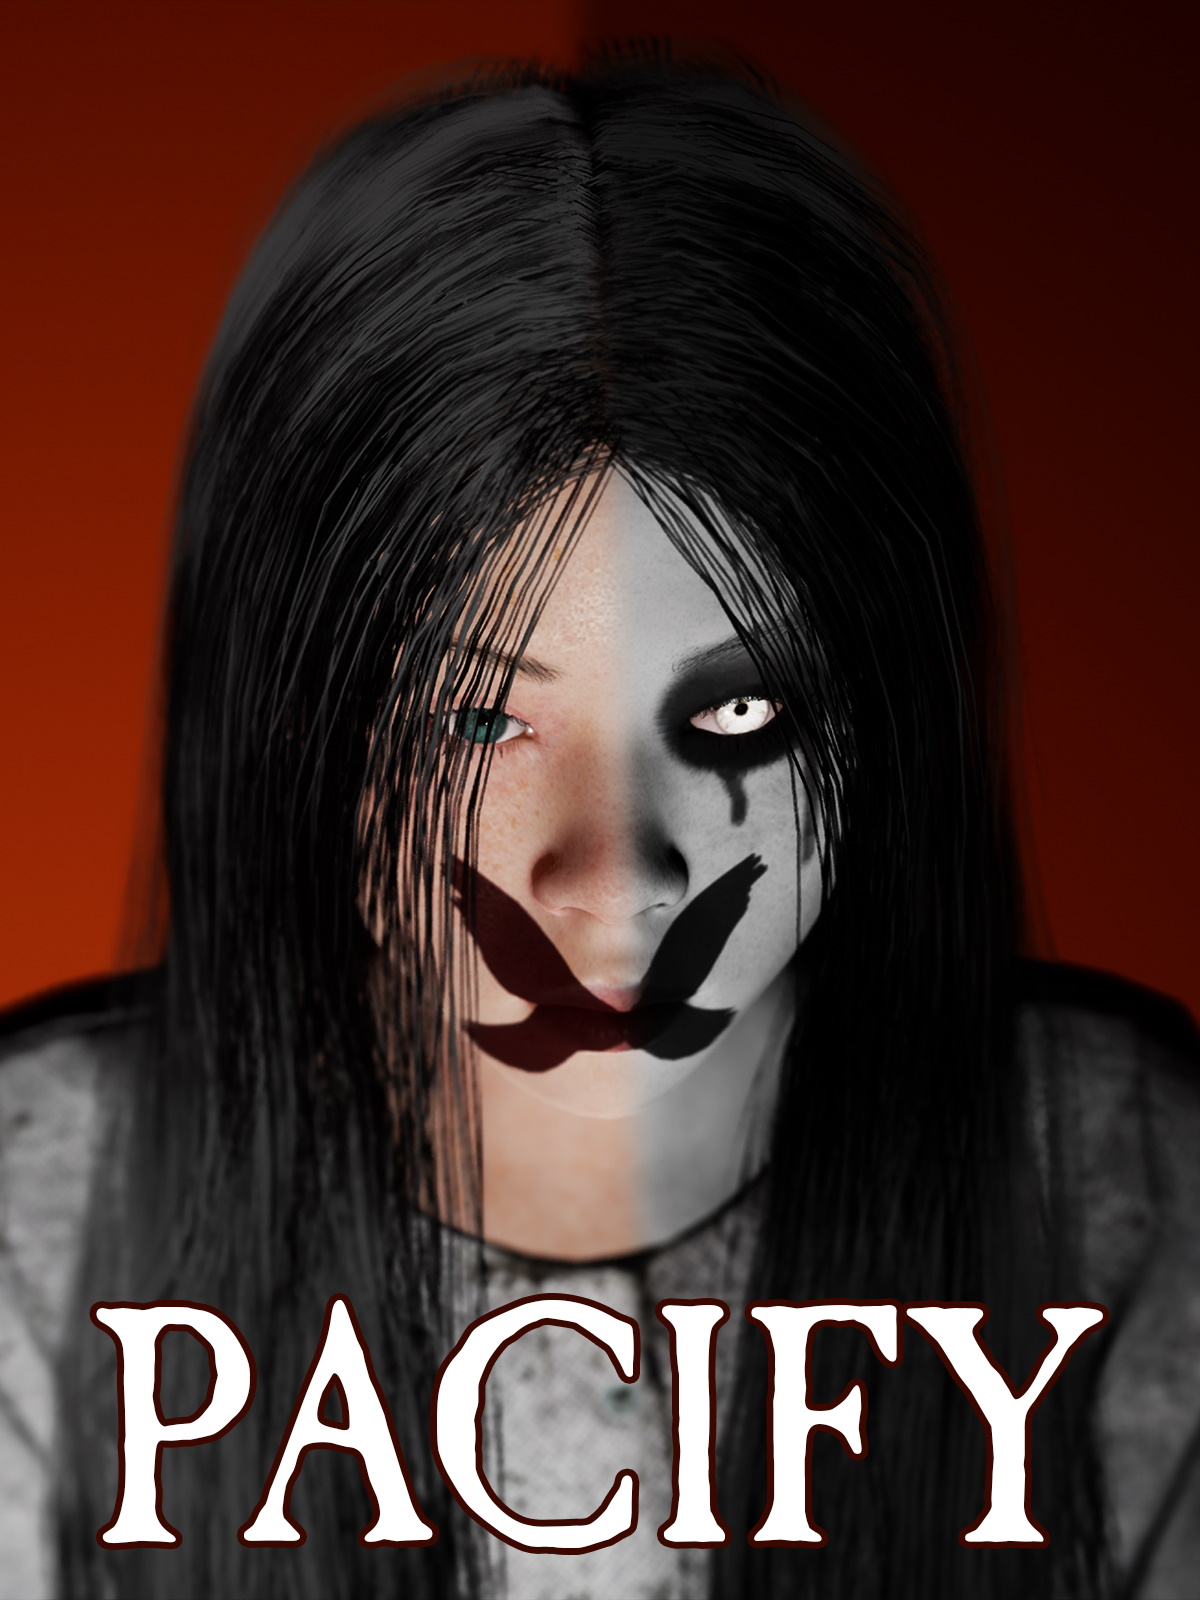 Pacify Images - LaunchBox Games Database